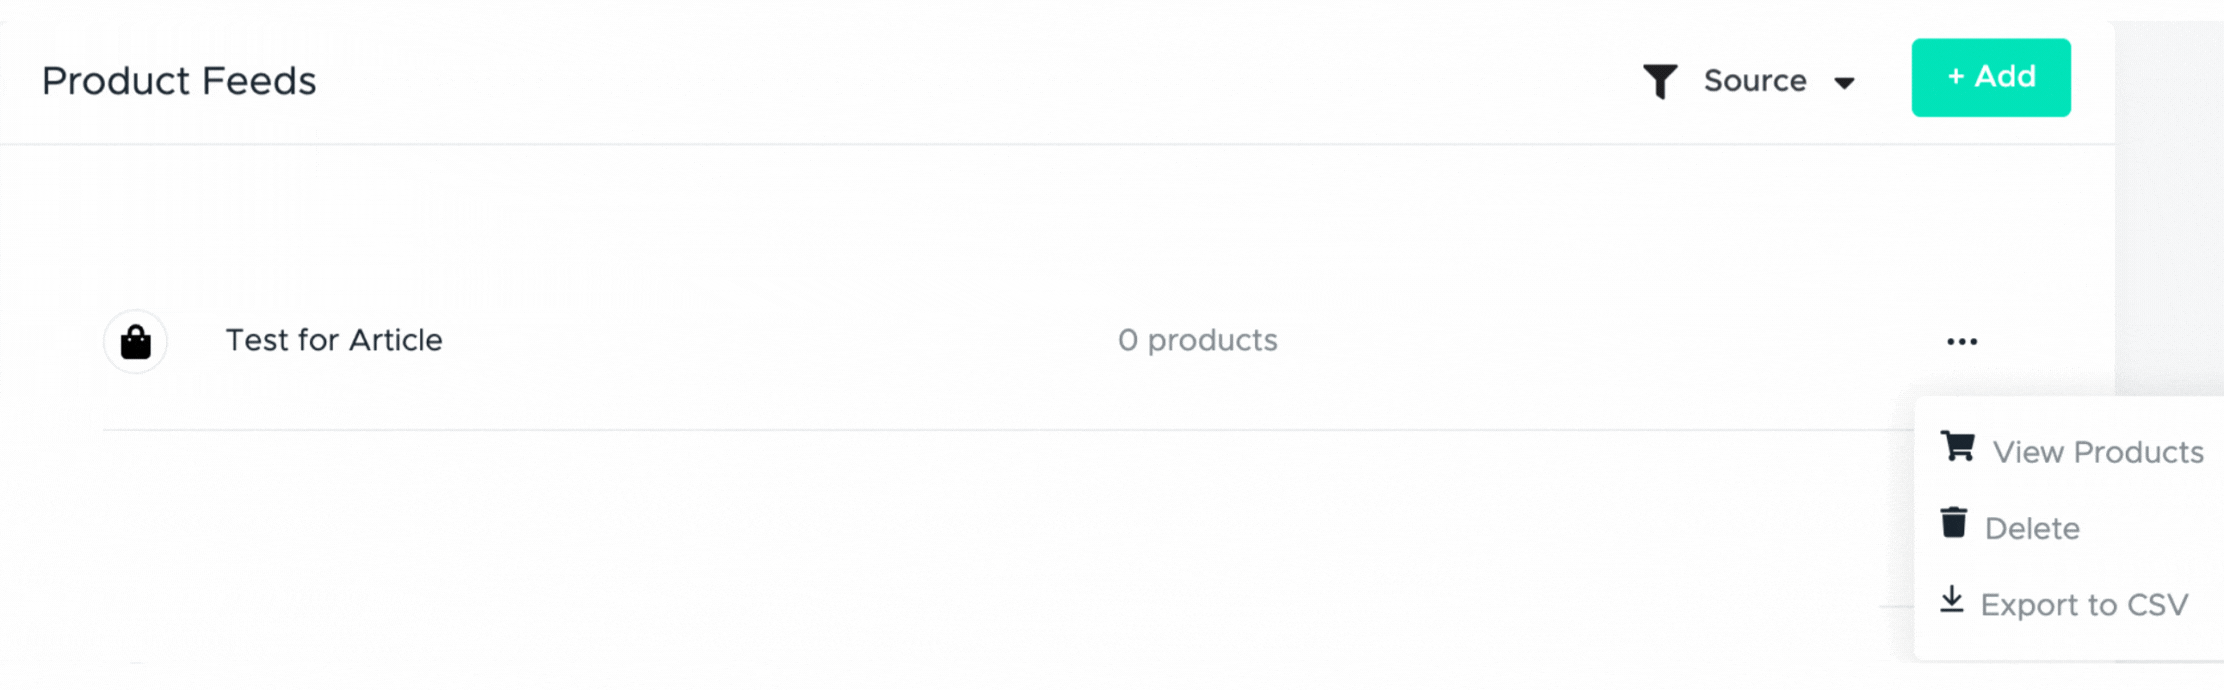 Custom_Product_Feed_-_How_to_add_a_product_to_a_custom_Product_Feed_-_23rd_November_2022.gif